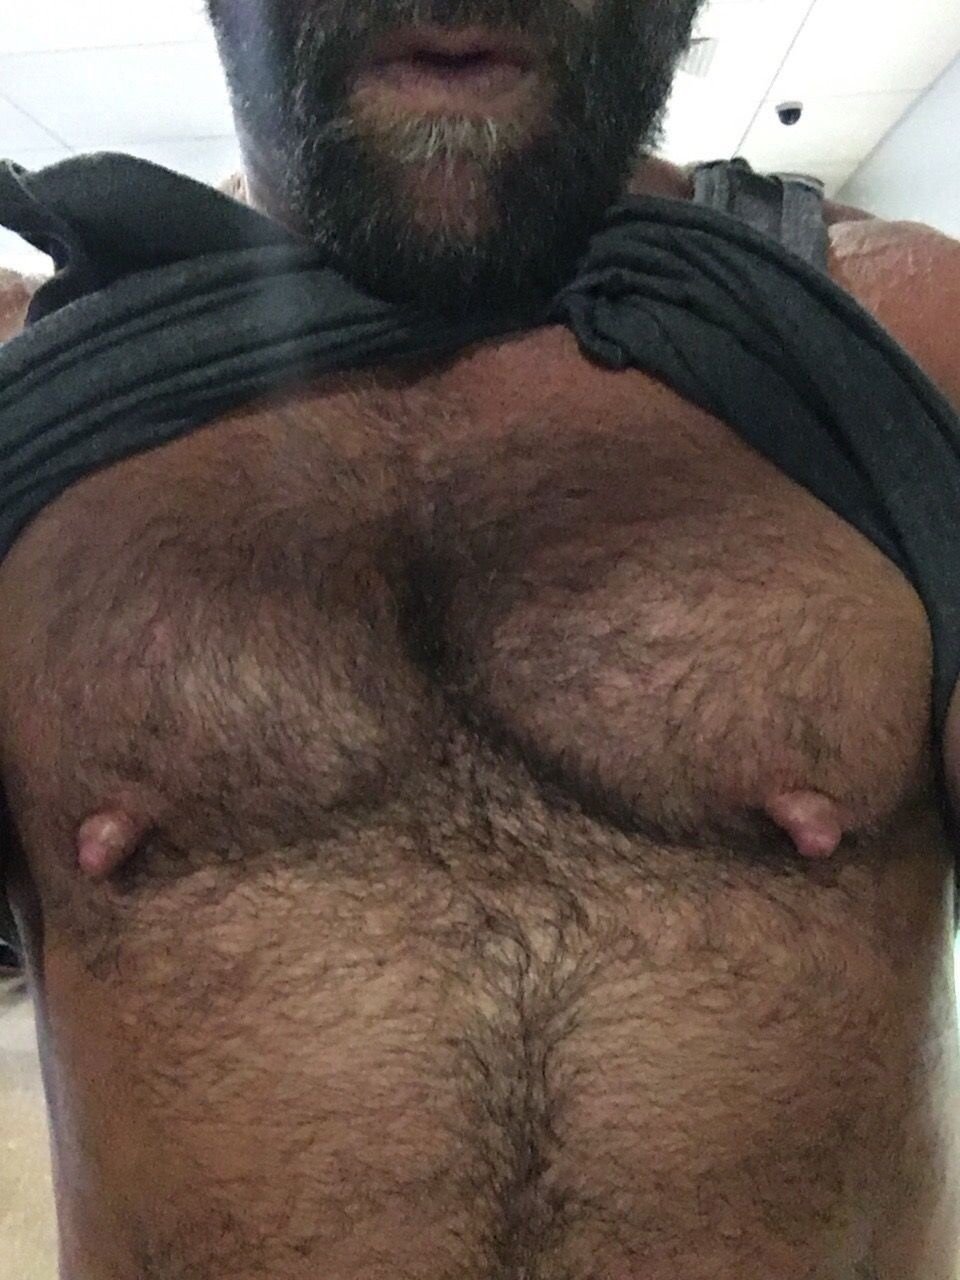 Photo by Smitty with the username @Resol702,  June 8, 2019 at 5:35 AM. The post is about the topic Hairy Man Nips.